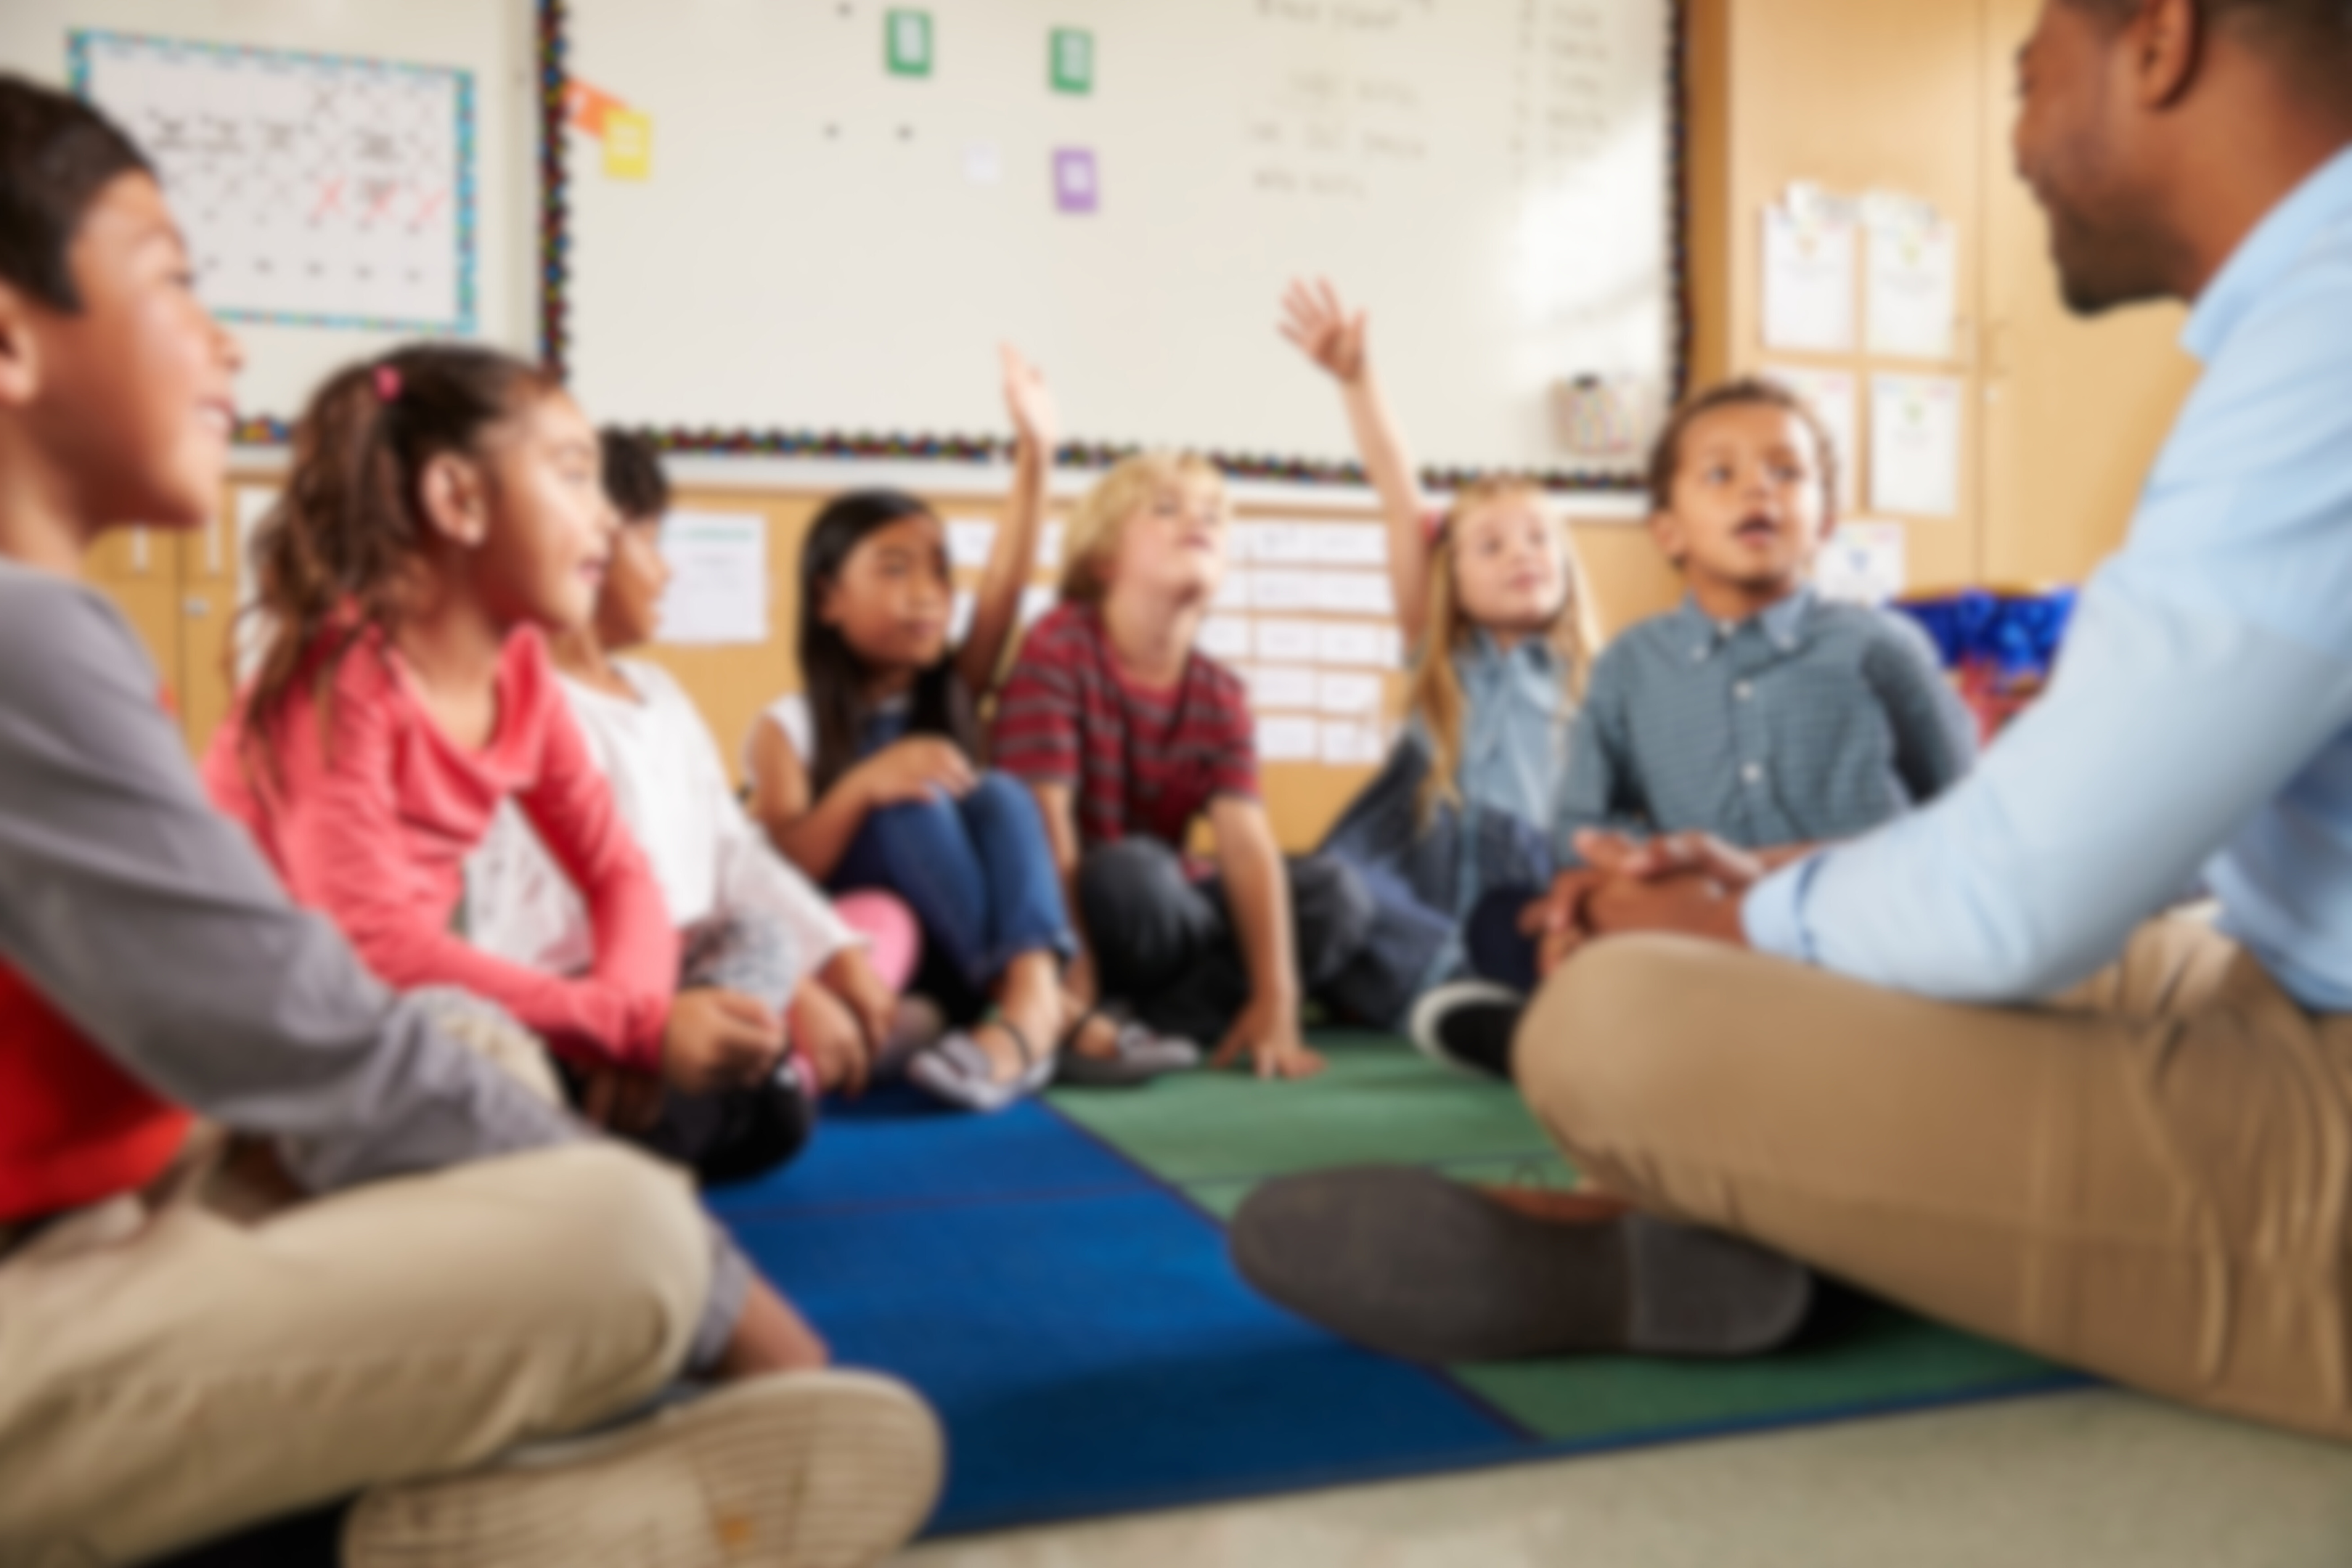 students in class raise hands - illustrative image for dual language immersion program